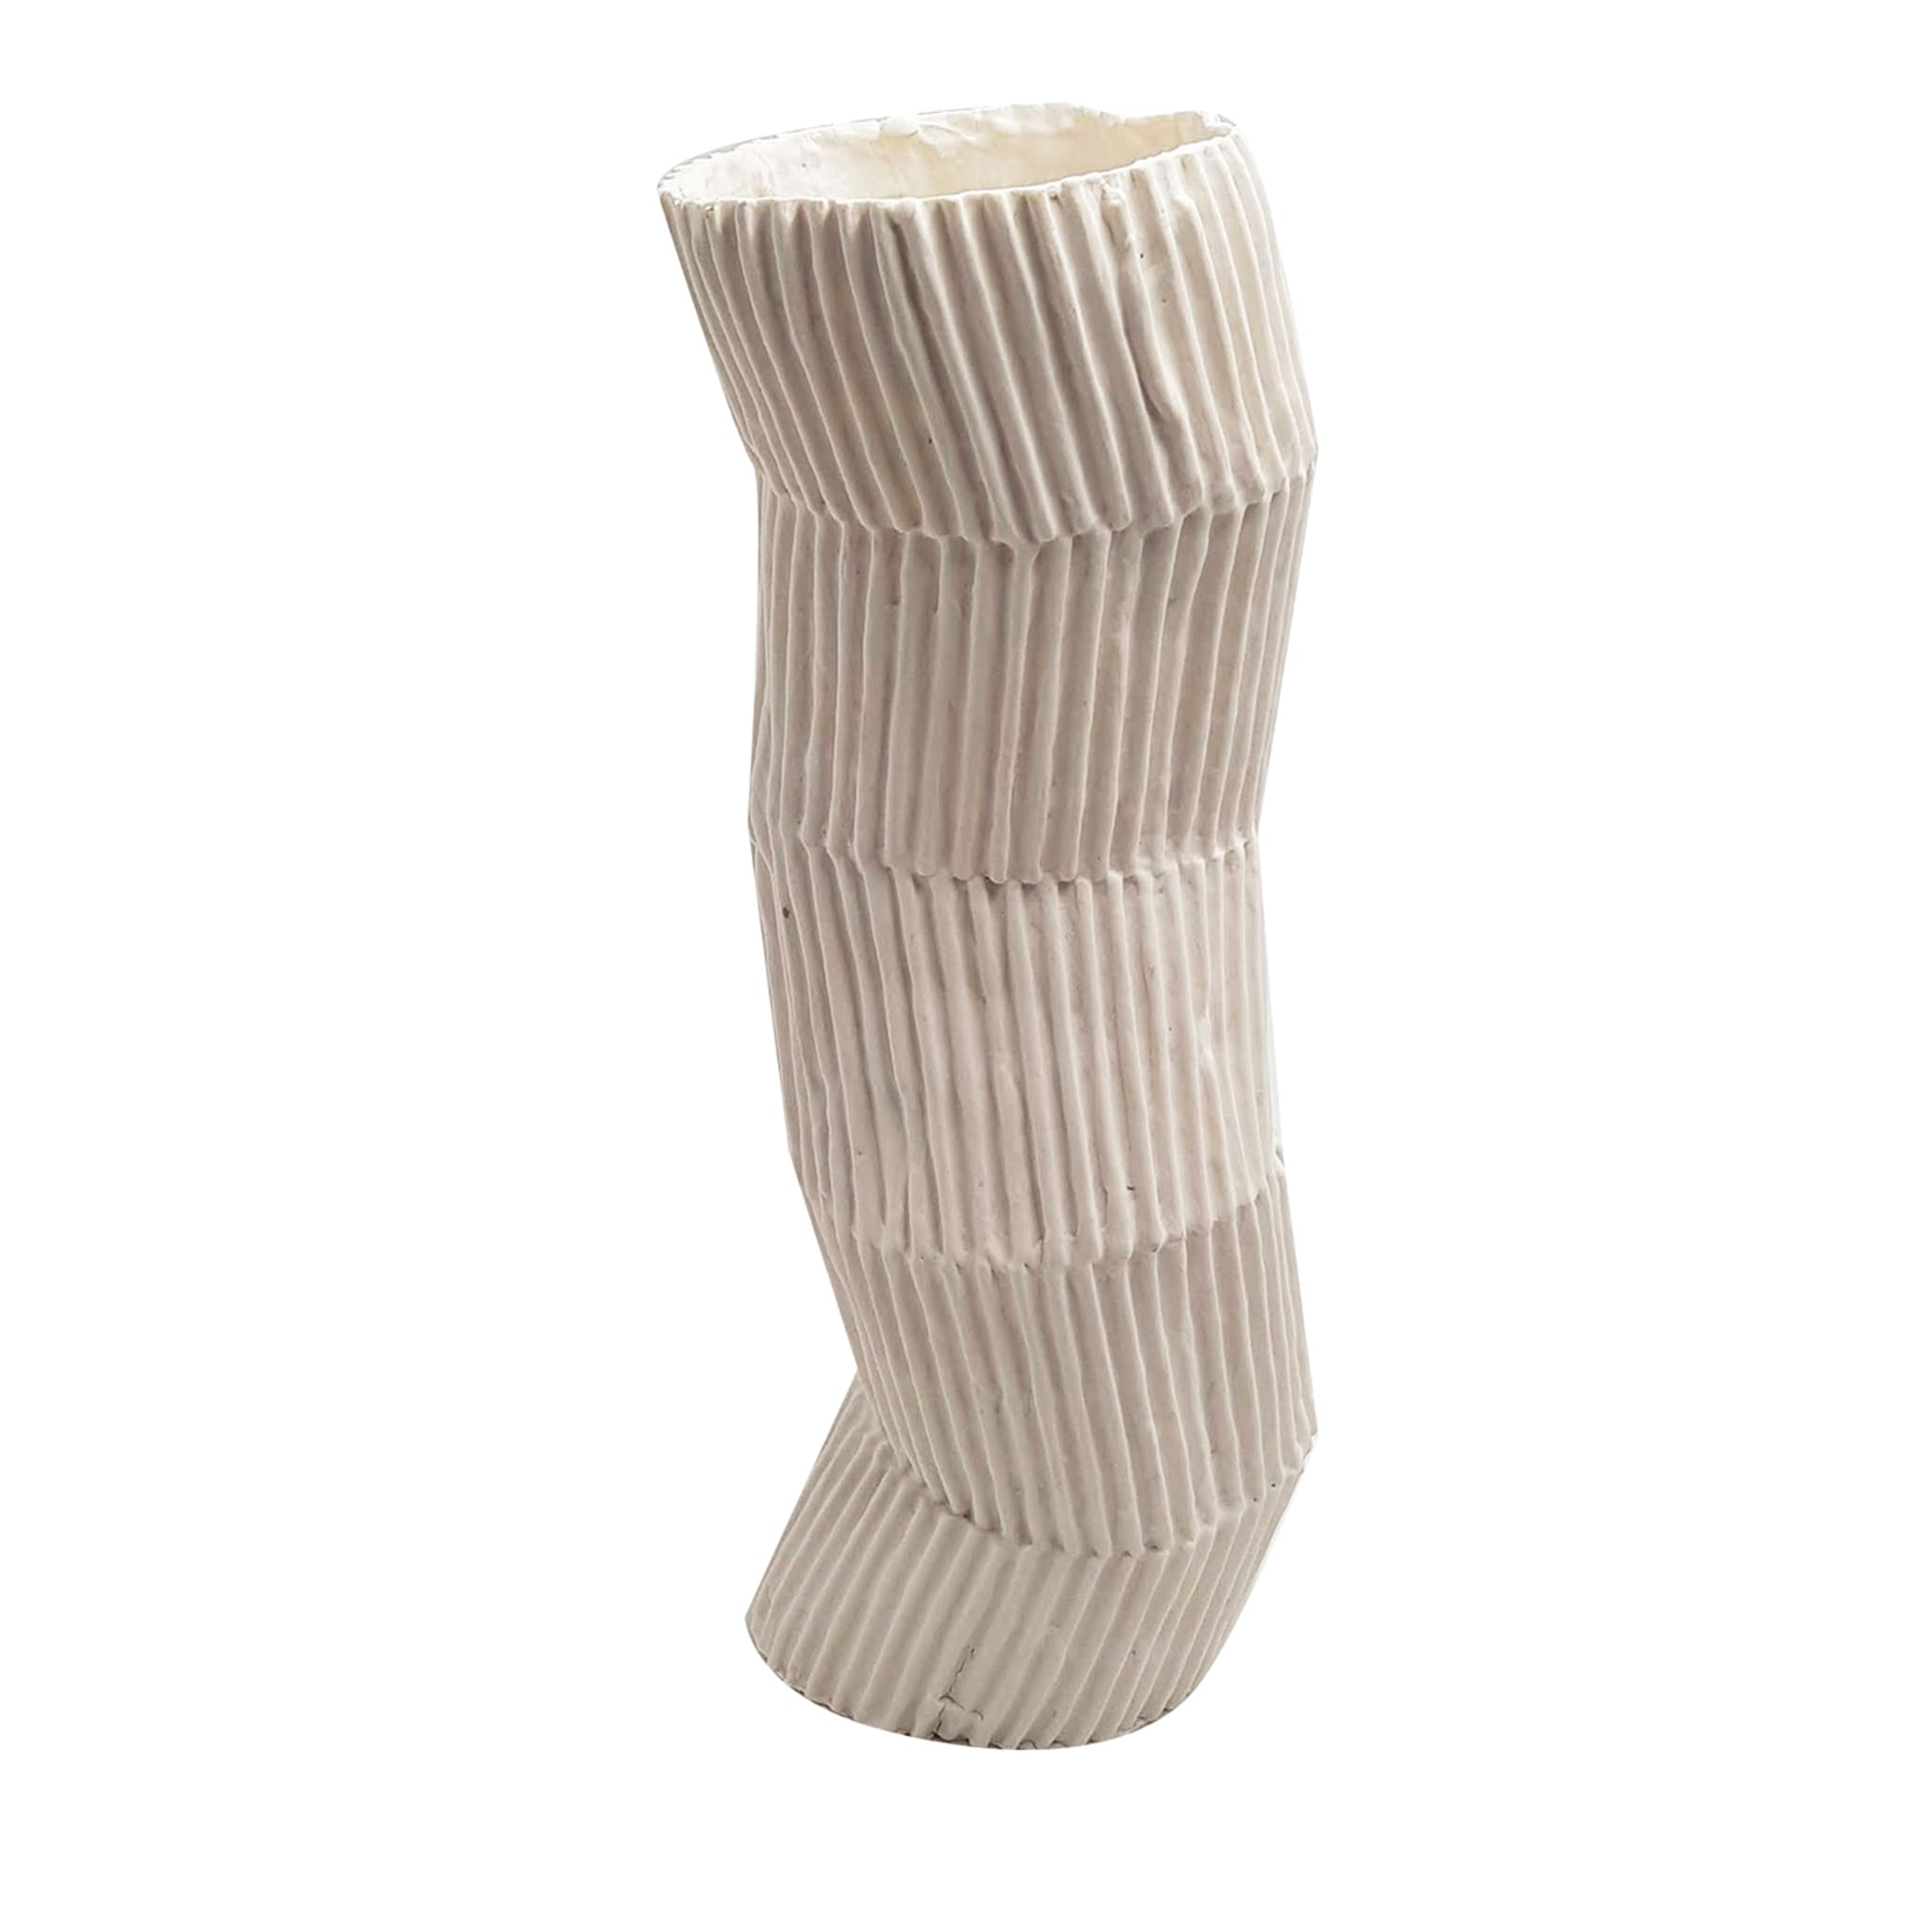 Le Torrette White Paperclay Vase by Nino Basso #1 - Main view